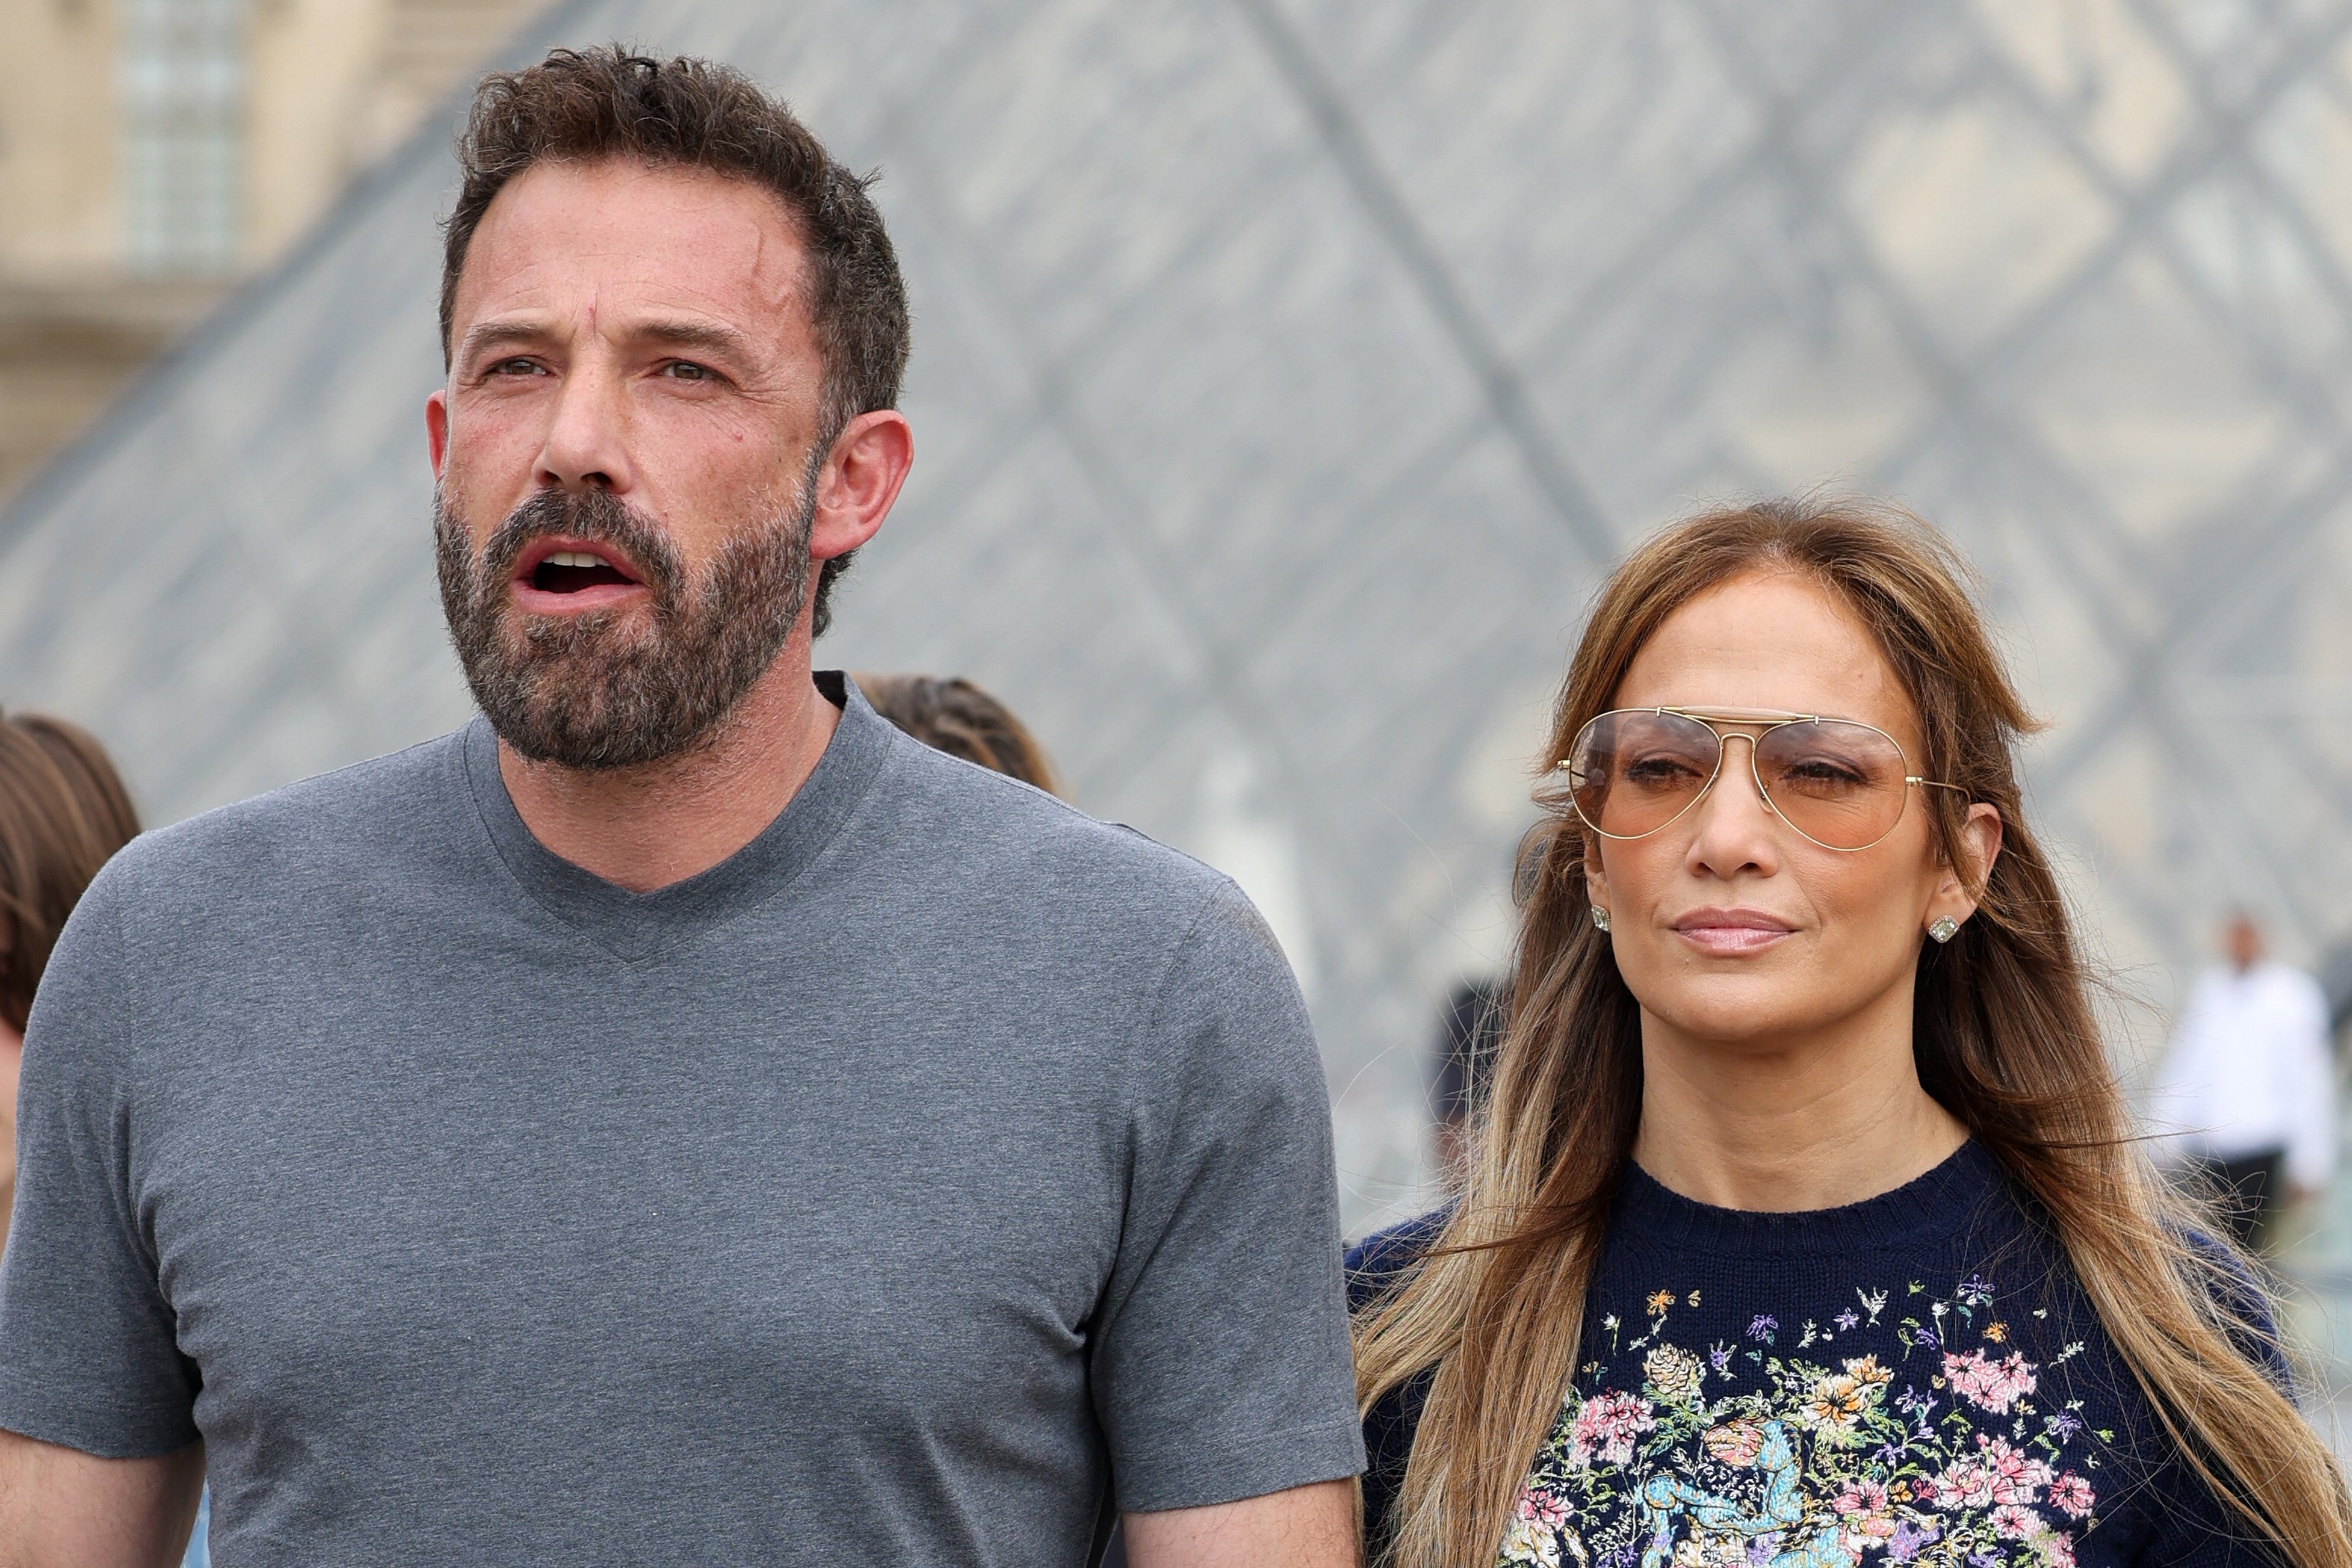 Jennifer Lopez and Ben Affleck are seen at the Louvre Museum on July 26, 2022 in Paris, France | Source: Getty Images